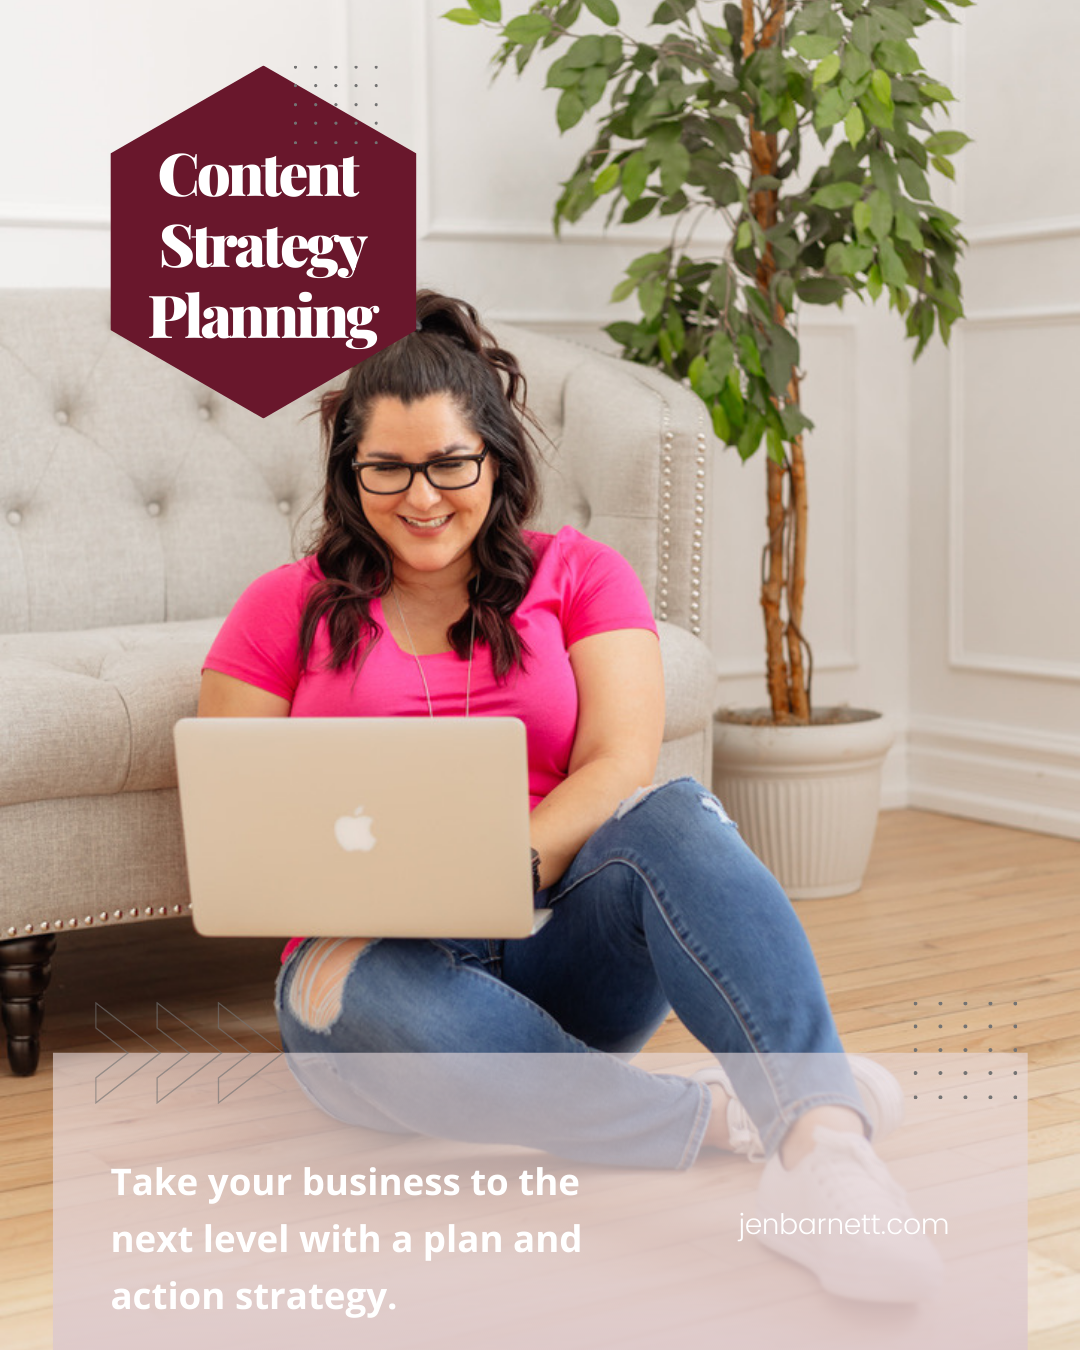 Content Strategy Planning | 1:1 Service